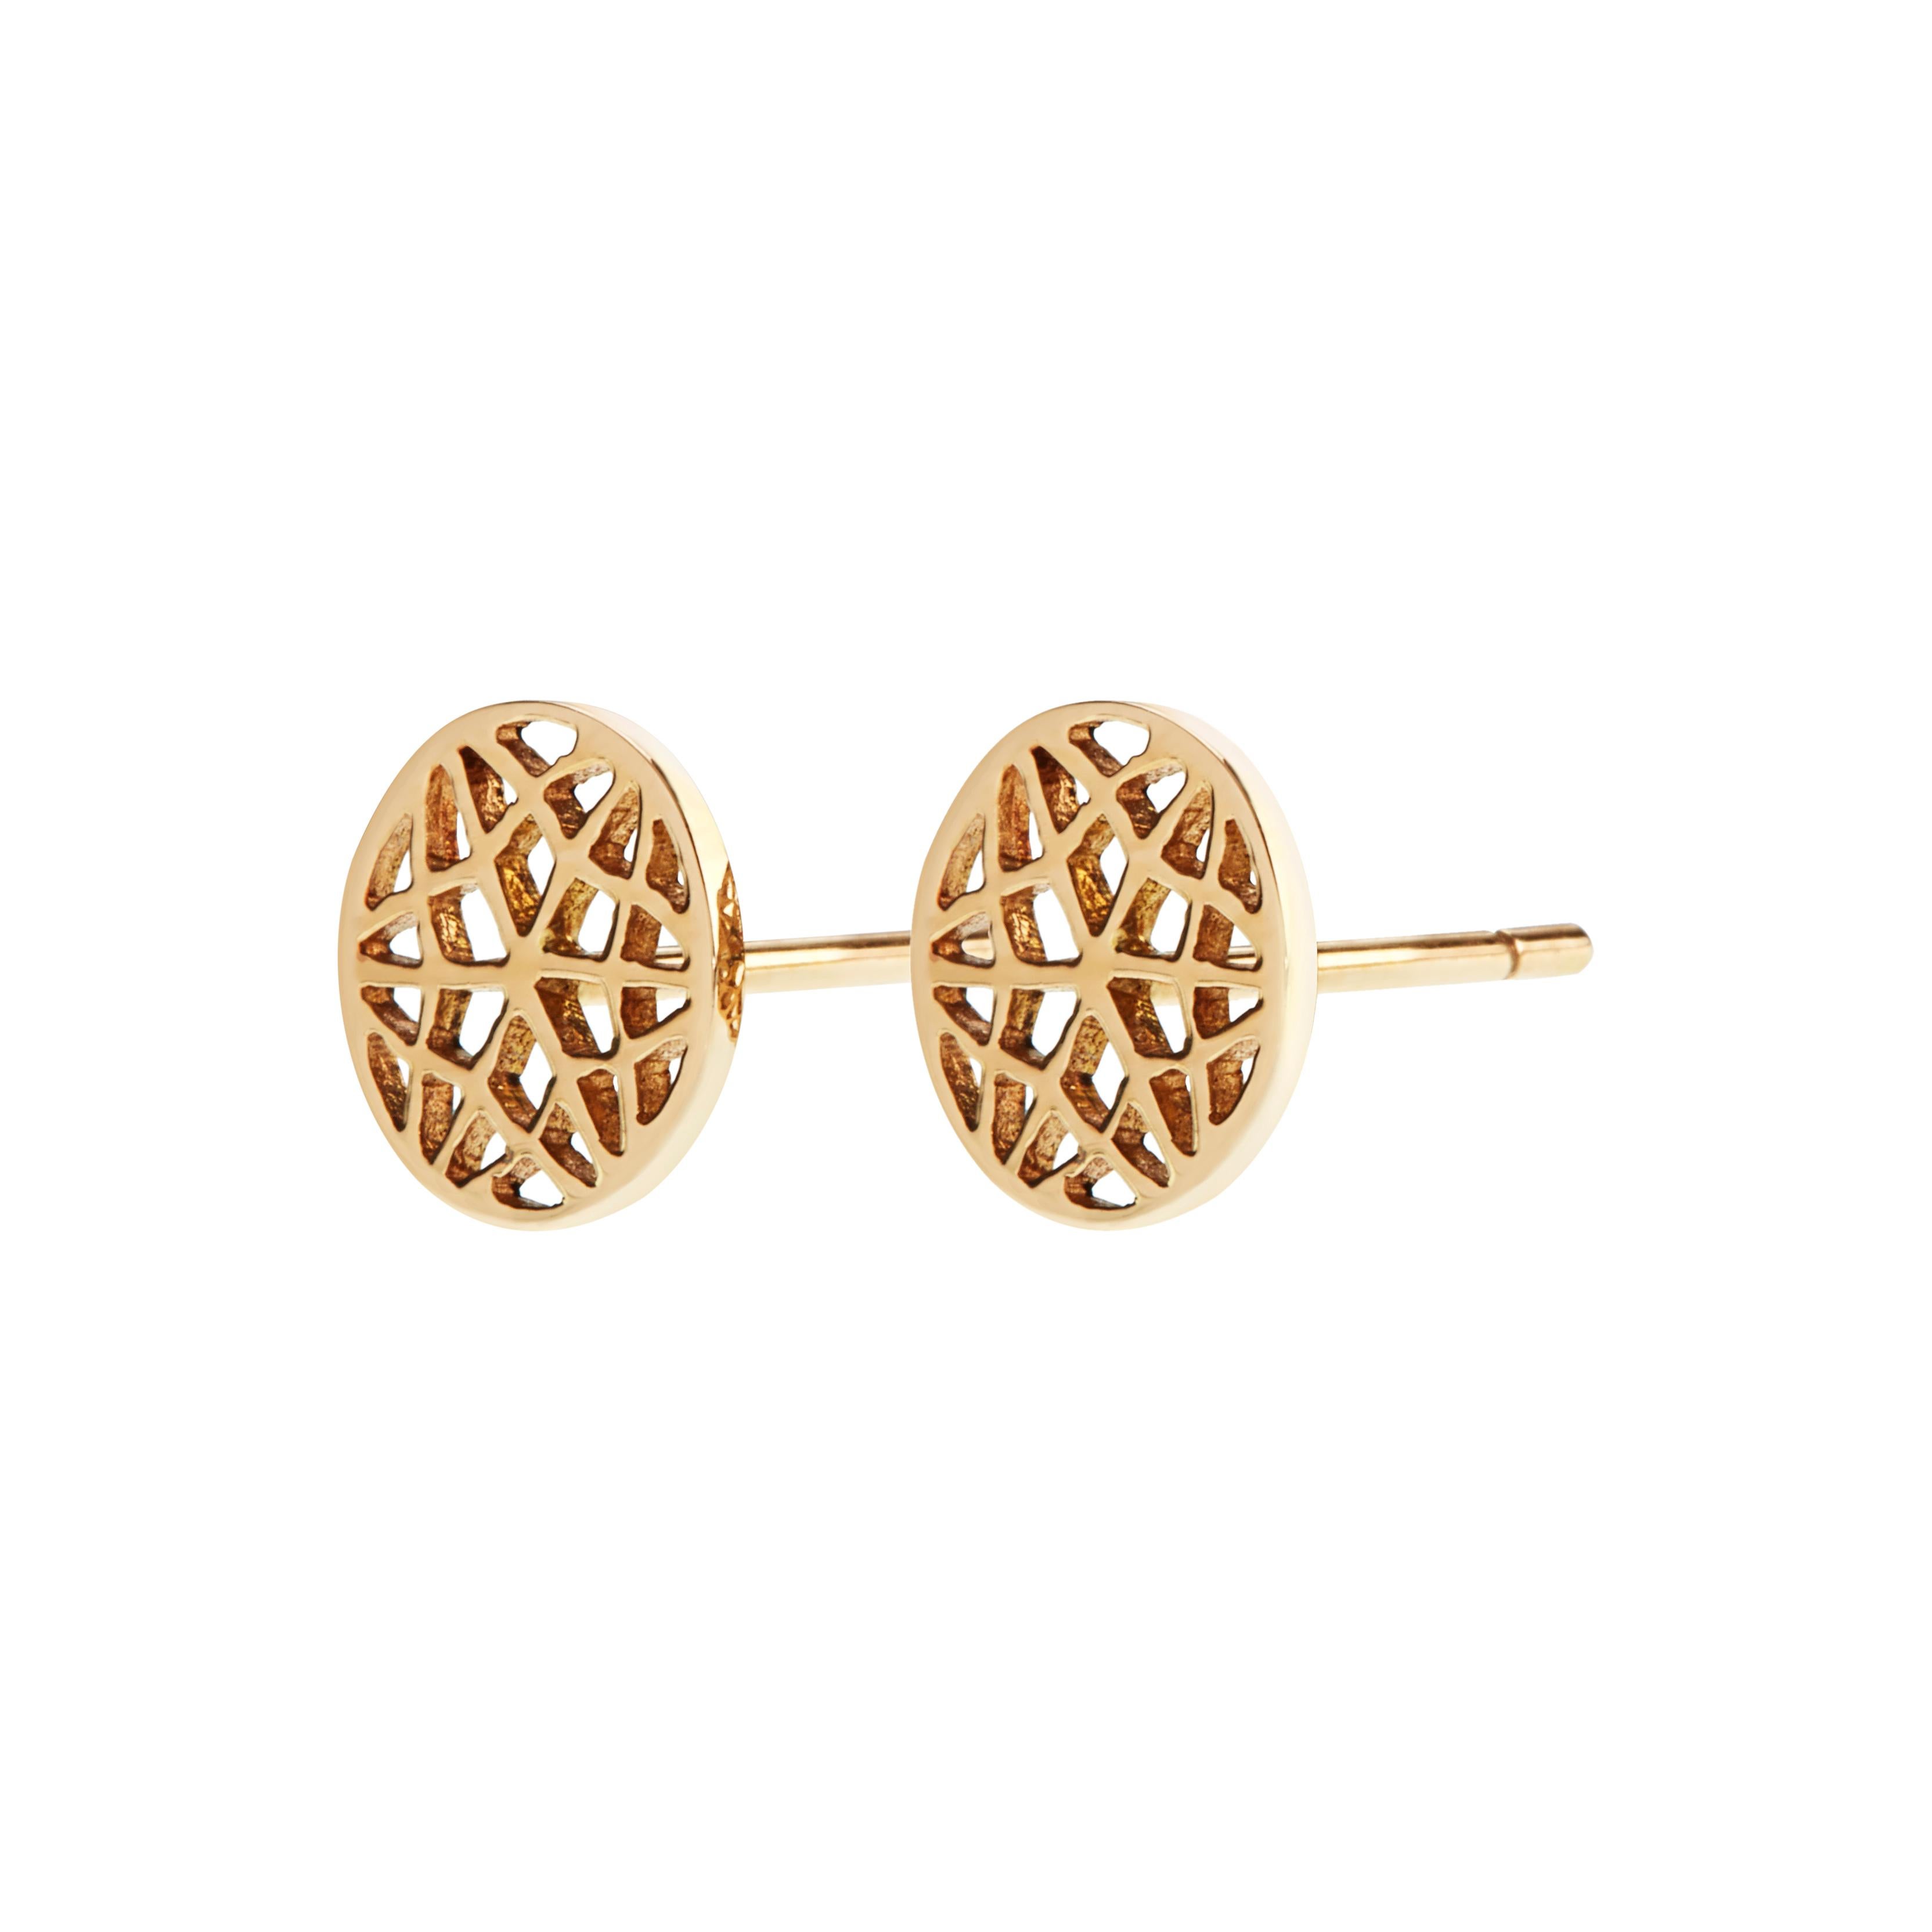 Handcrafted 18 Karat Yellow Gold Stud Earrings. Simple yet subtly elegant our gold lace earrings are ideal for an everyday precious stud. Can be worn both with a casual outfit for an every day look or with a more elegant outfit. Showcasing our